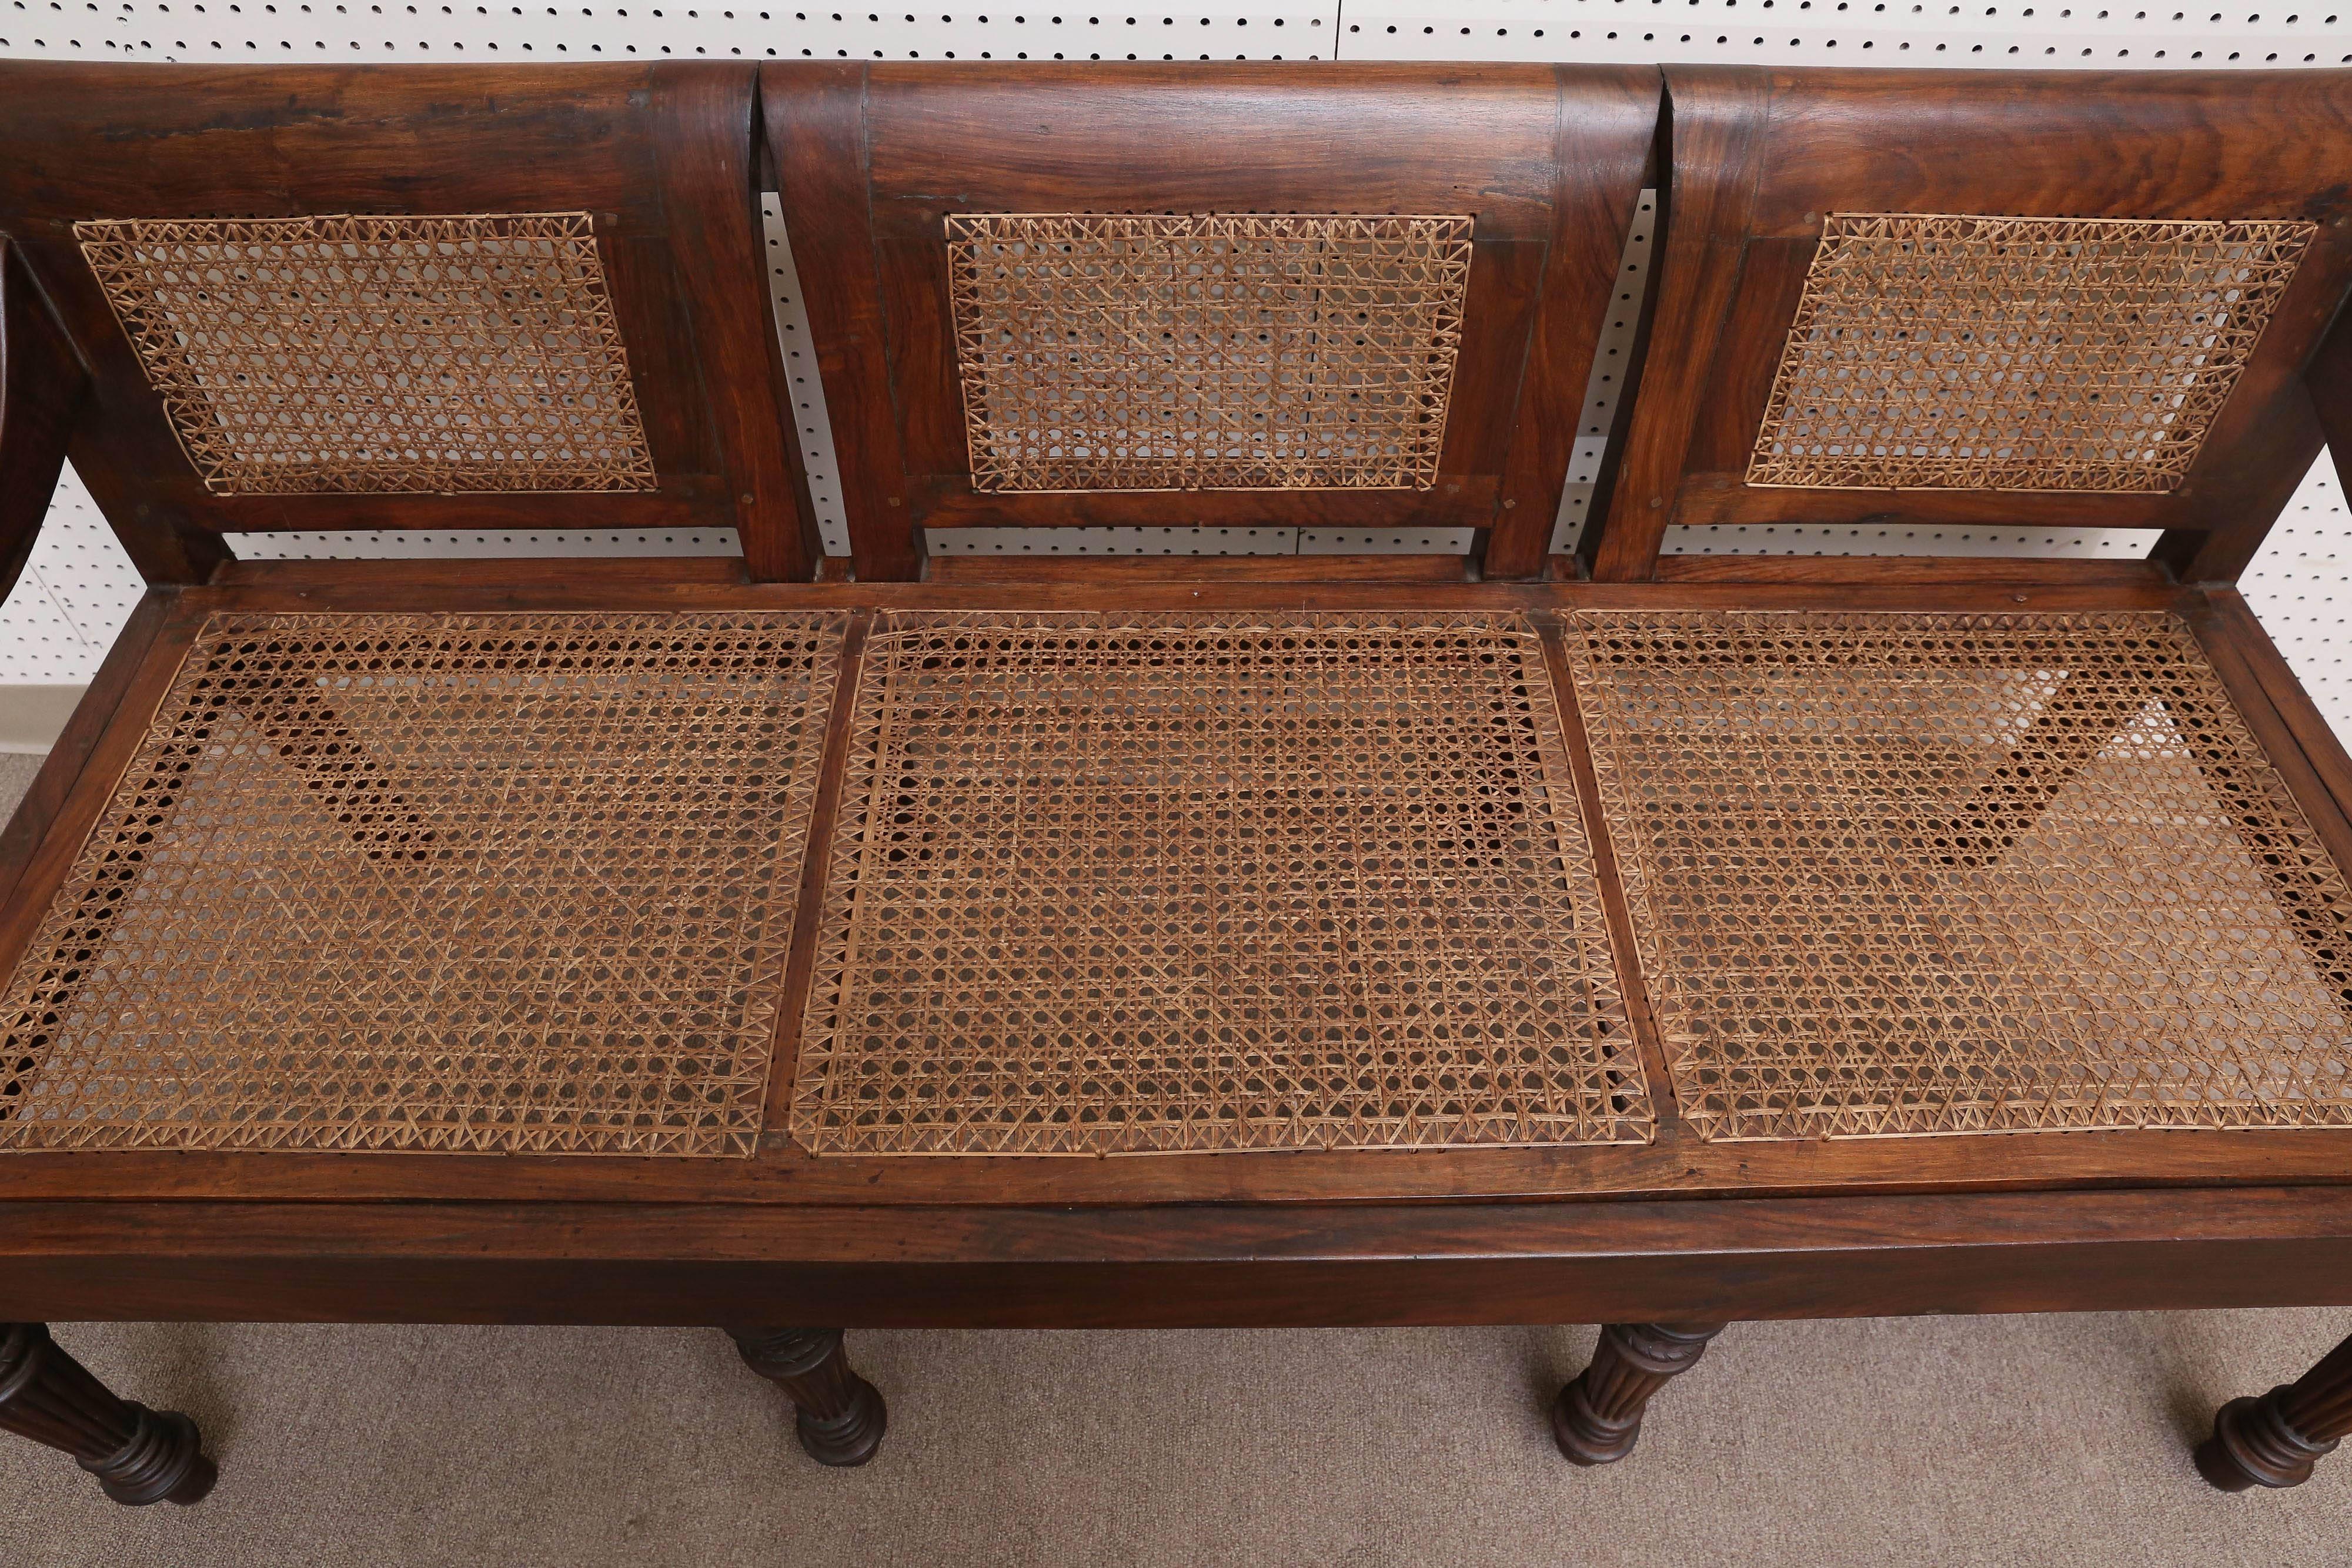 Indian 1920s Solid Teakwood and Cane British Colonial Bench from a Tea Plantation